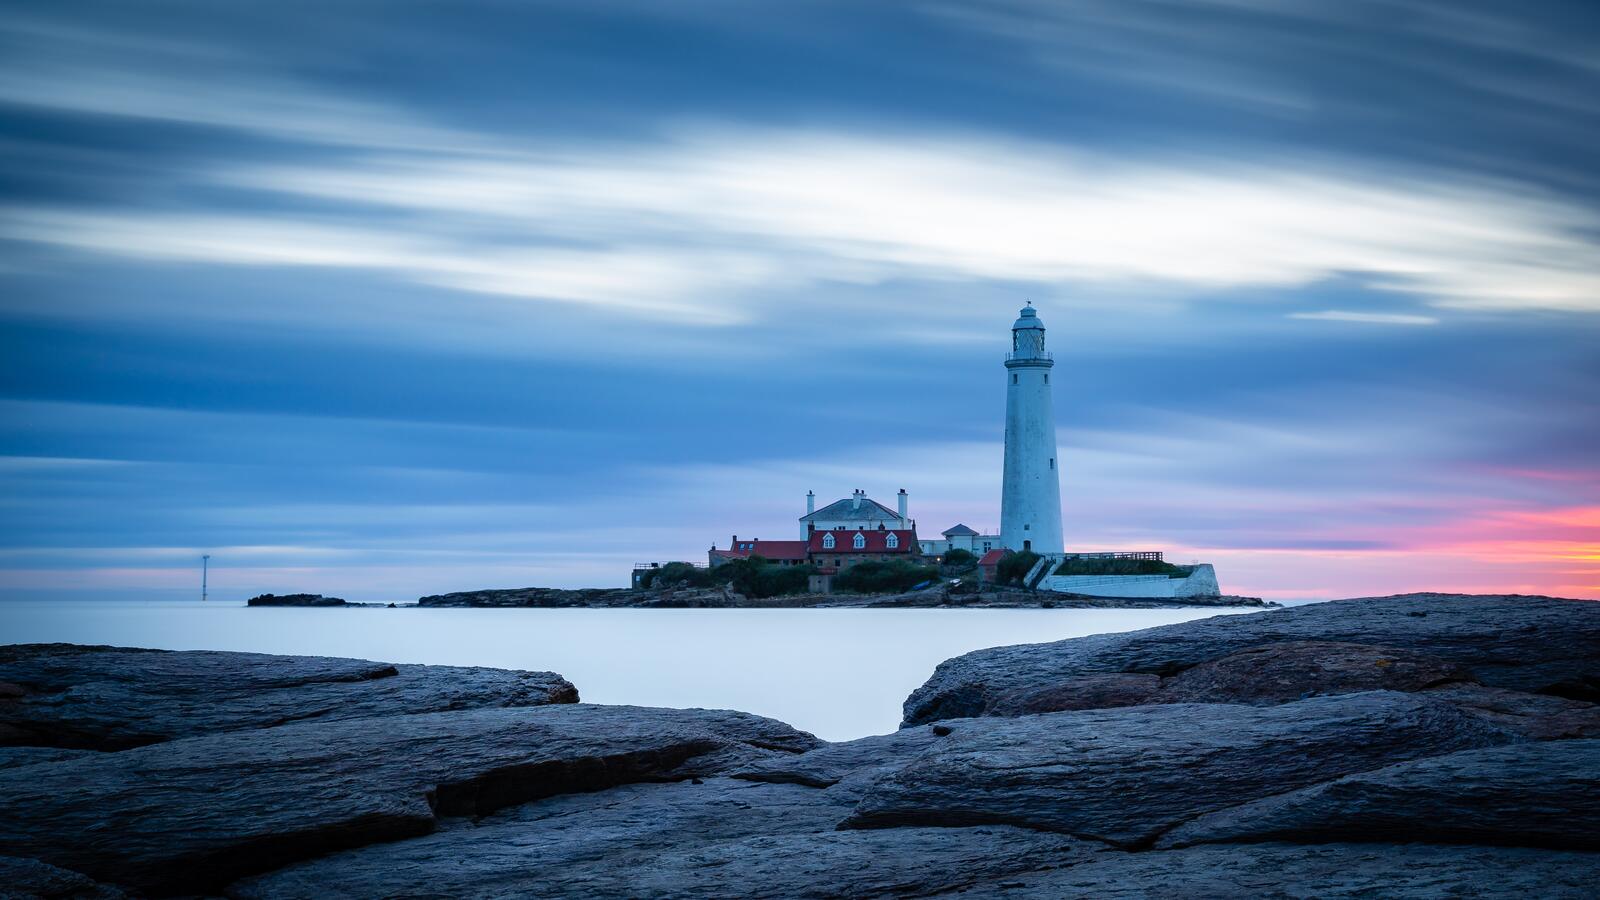 Free photo Lighthouse located on an island next to the ocean shore